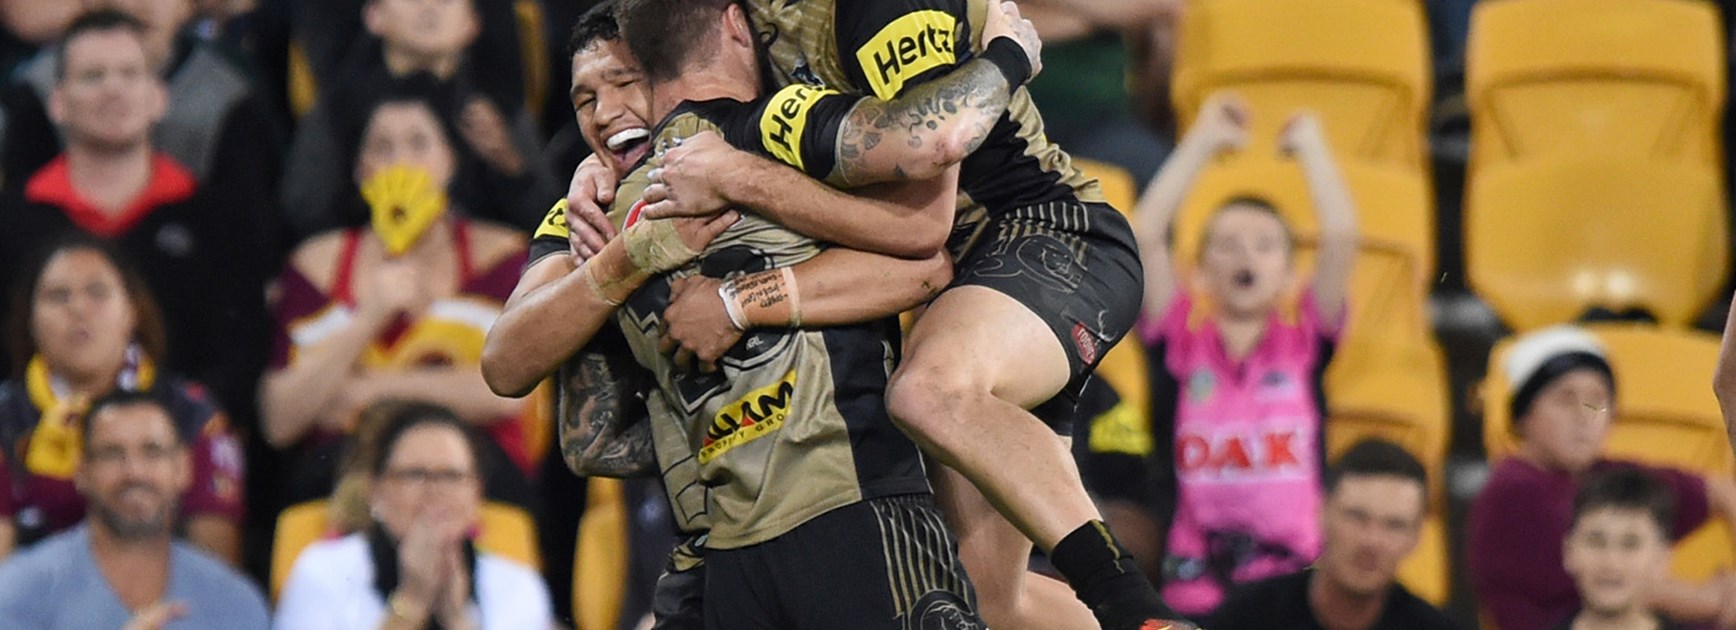 The Panthers celebrate a try against the Broncos at Suncorp Stadium on Friday night.